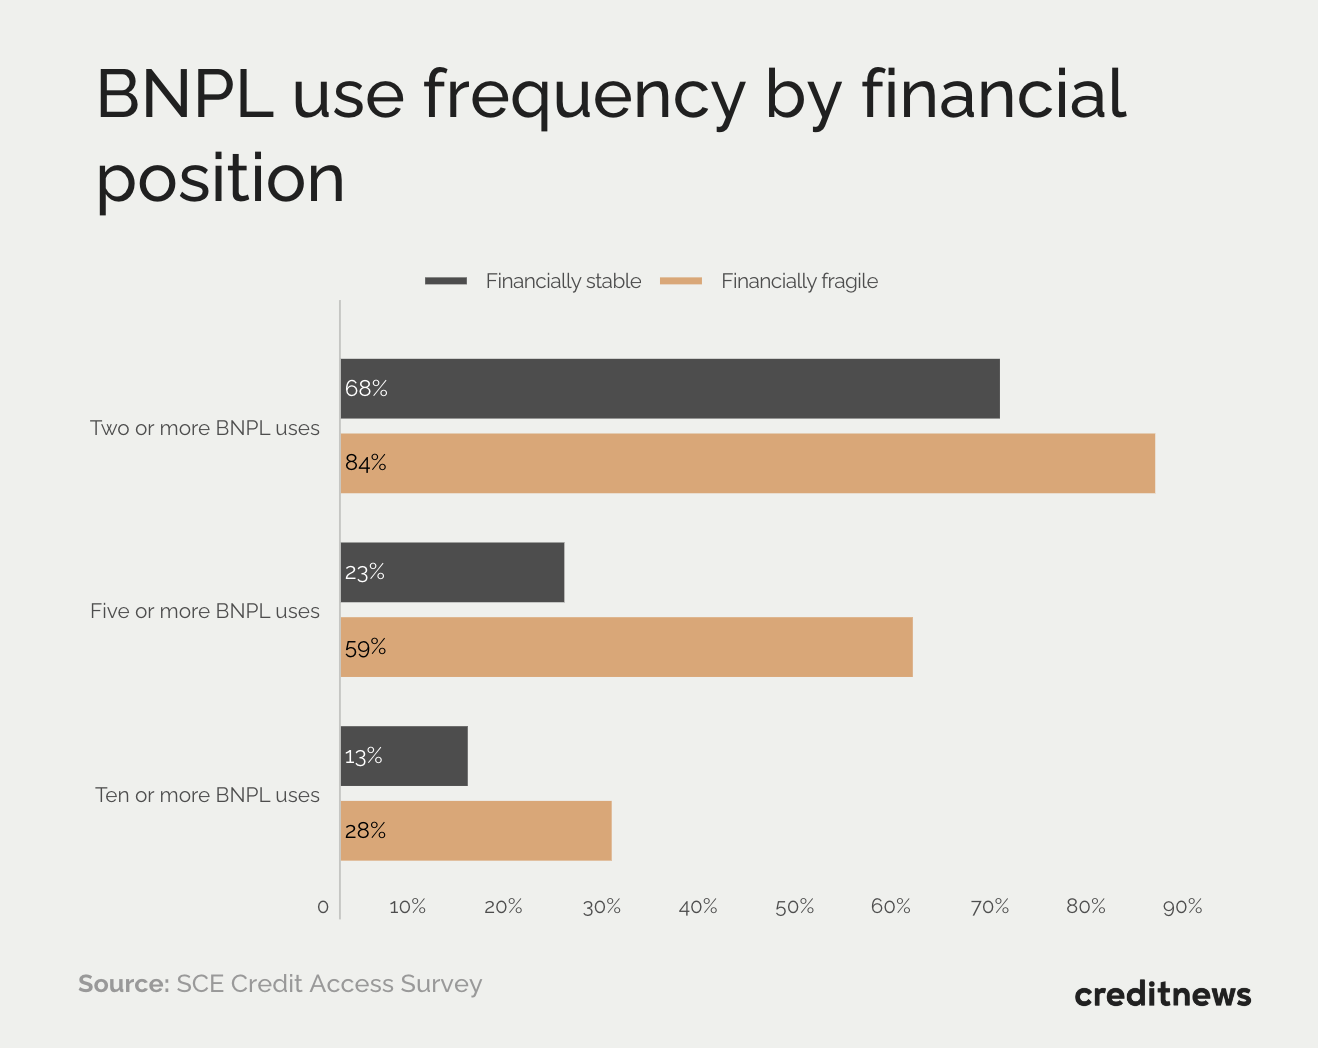 Chart showing BNPL use frequency by financial position